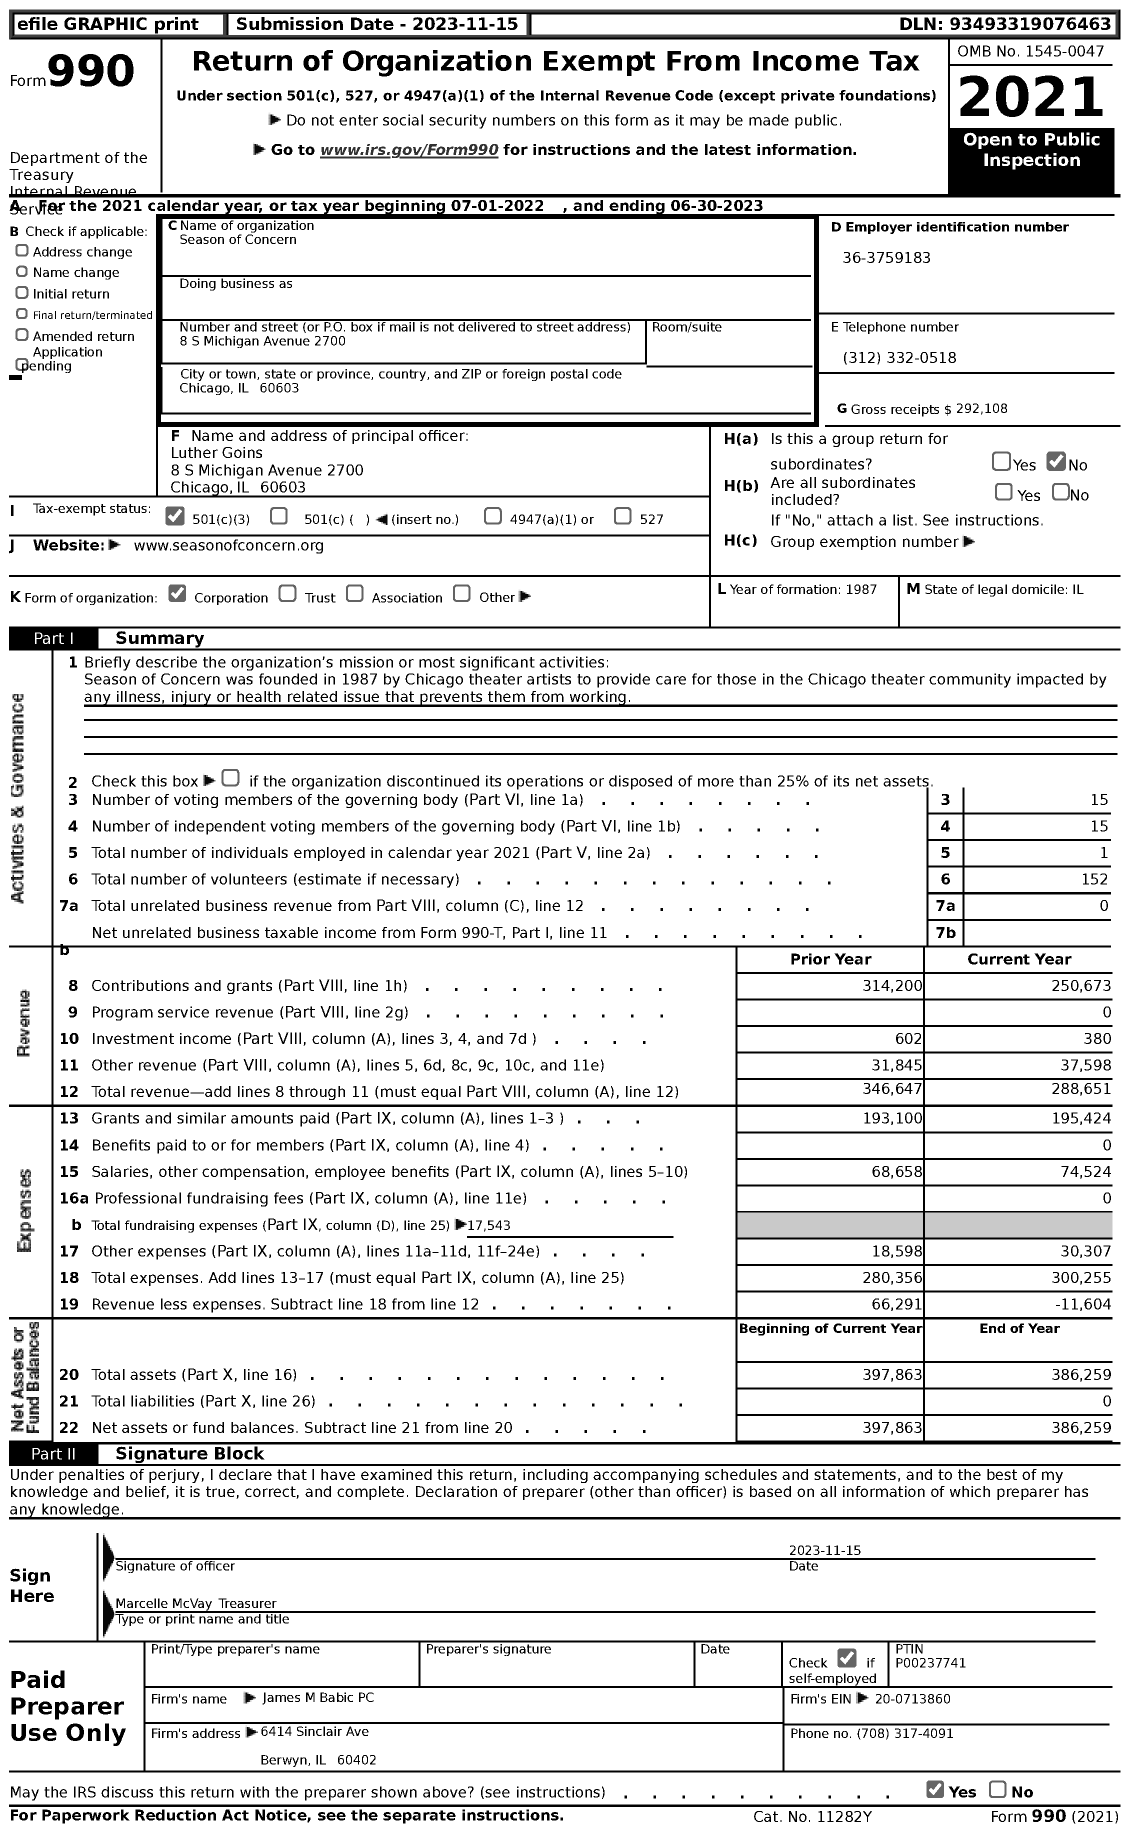 Image of first page of 2022 Form 990 for Season of Concern